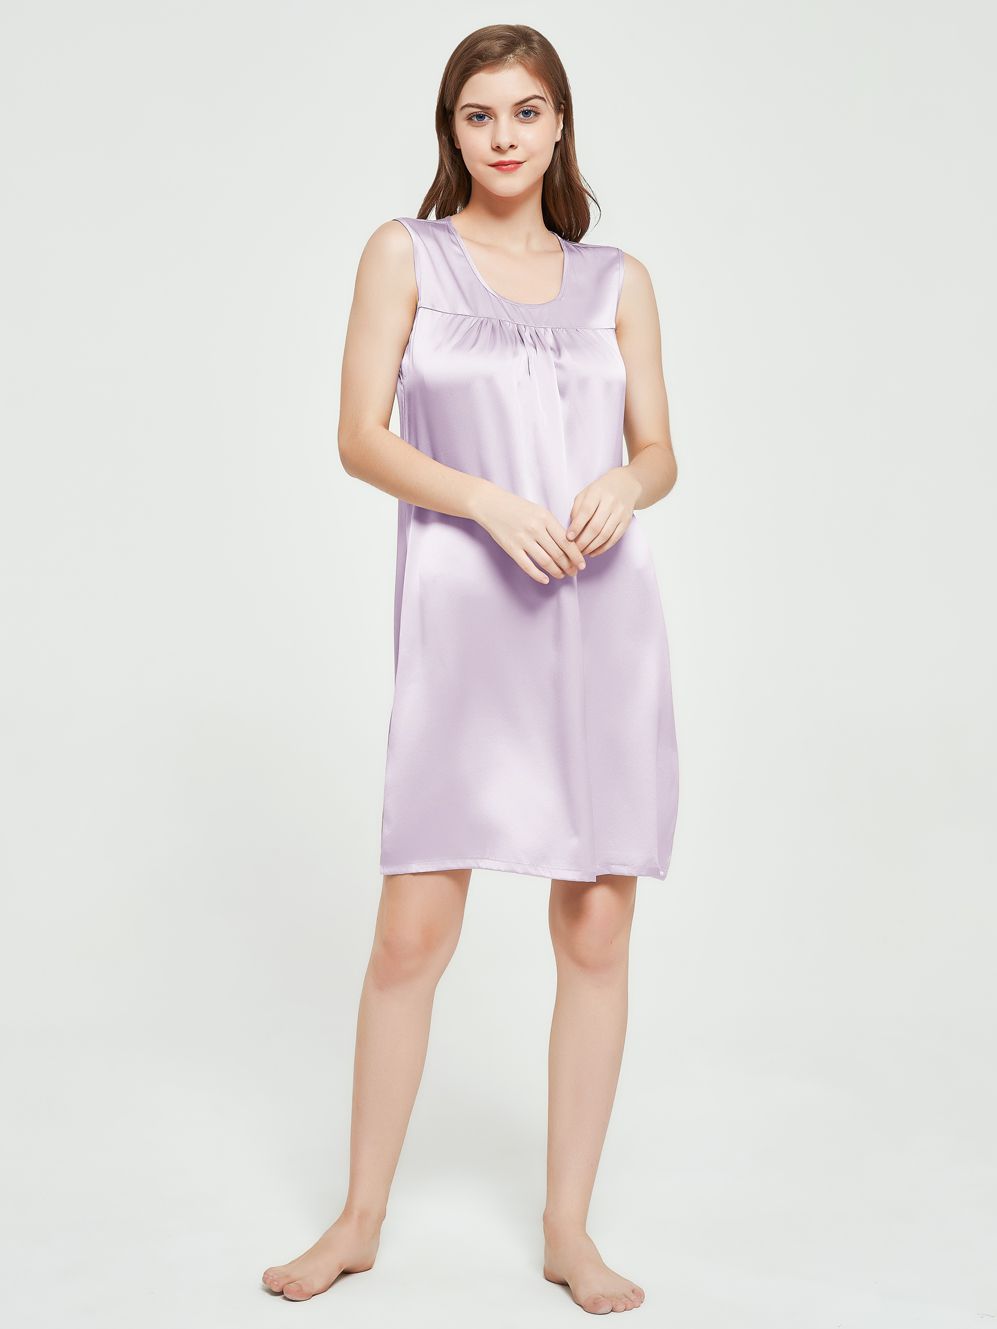 Comfy Rosy Pink Sleeveless Round Neck Silk Nightgown